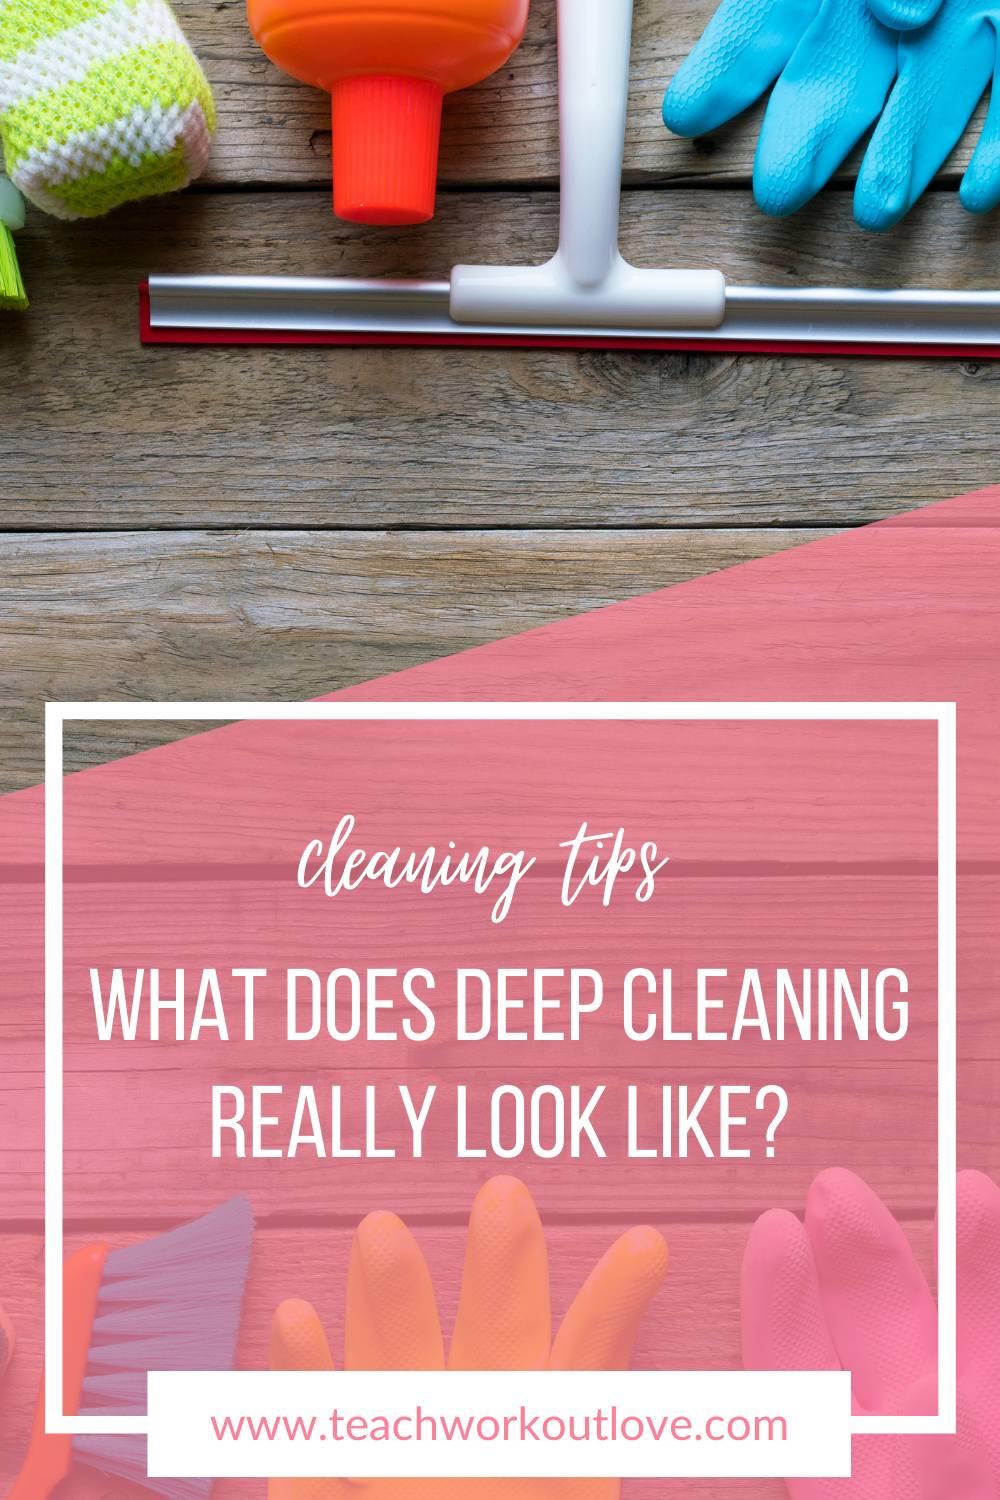 Cleaning your home is a lot of work! But everyone once in a while, your home requires a deep clean. What does that mean? Read on to find out.